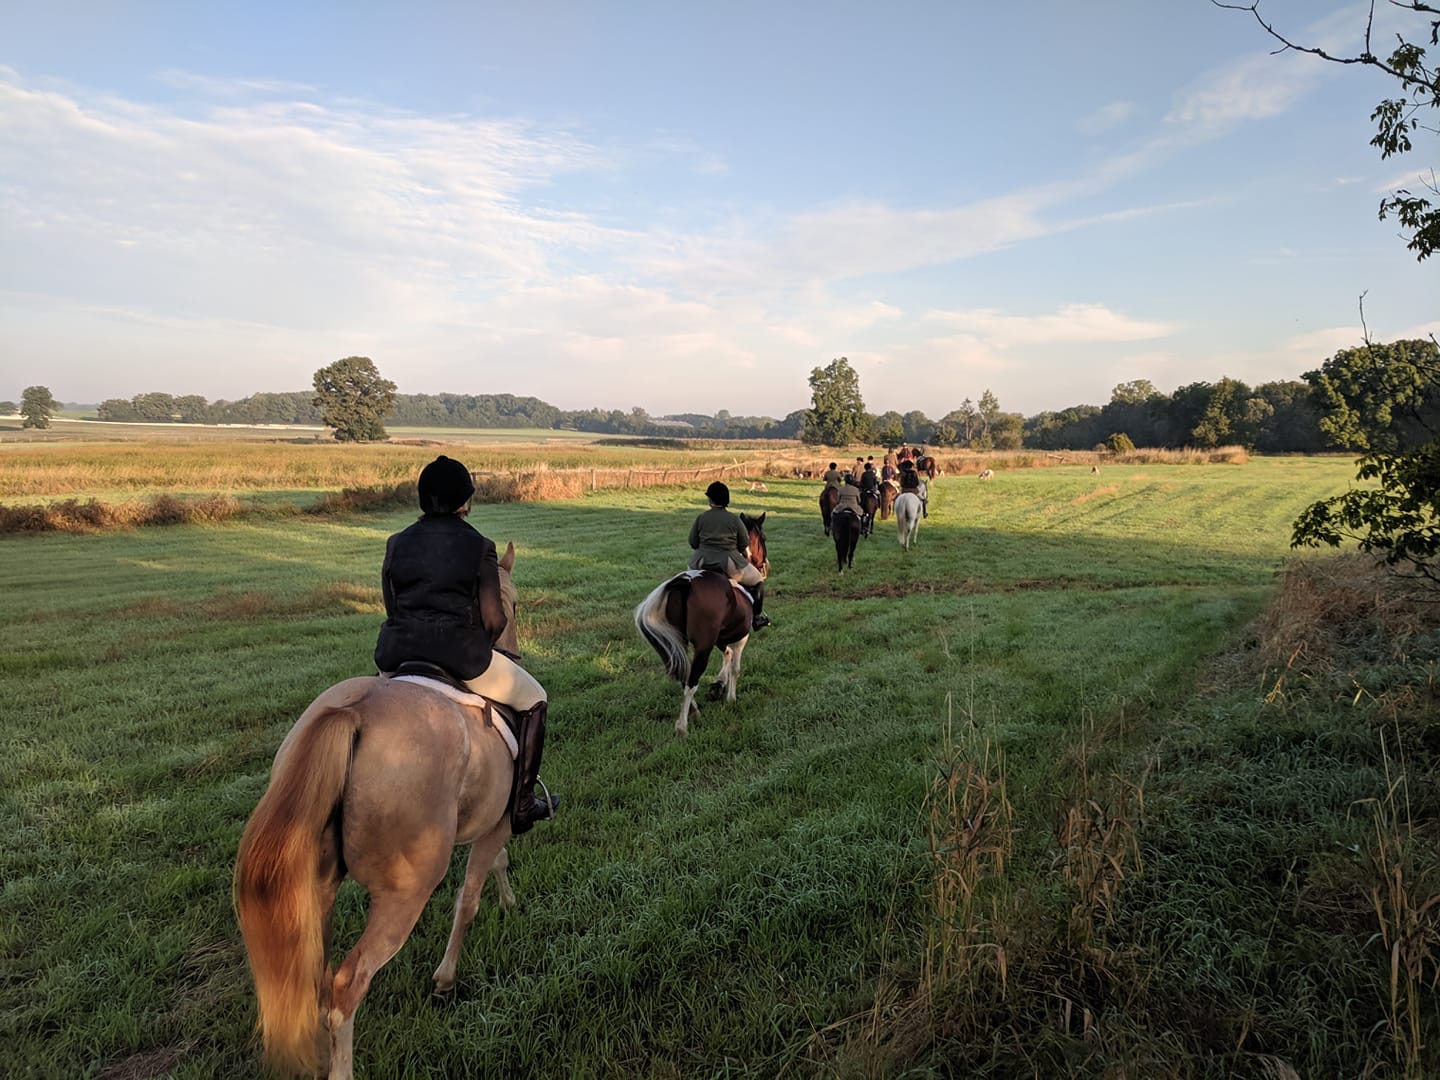 a line of horses with riders, riding single file through a field of wheat on one side and grass on the other. there are trees in the distance, and a pack of hounds beyond. the sky is blue with wispy clouds.